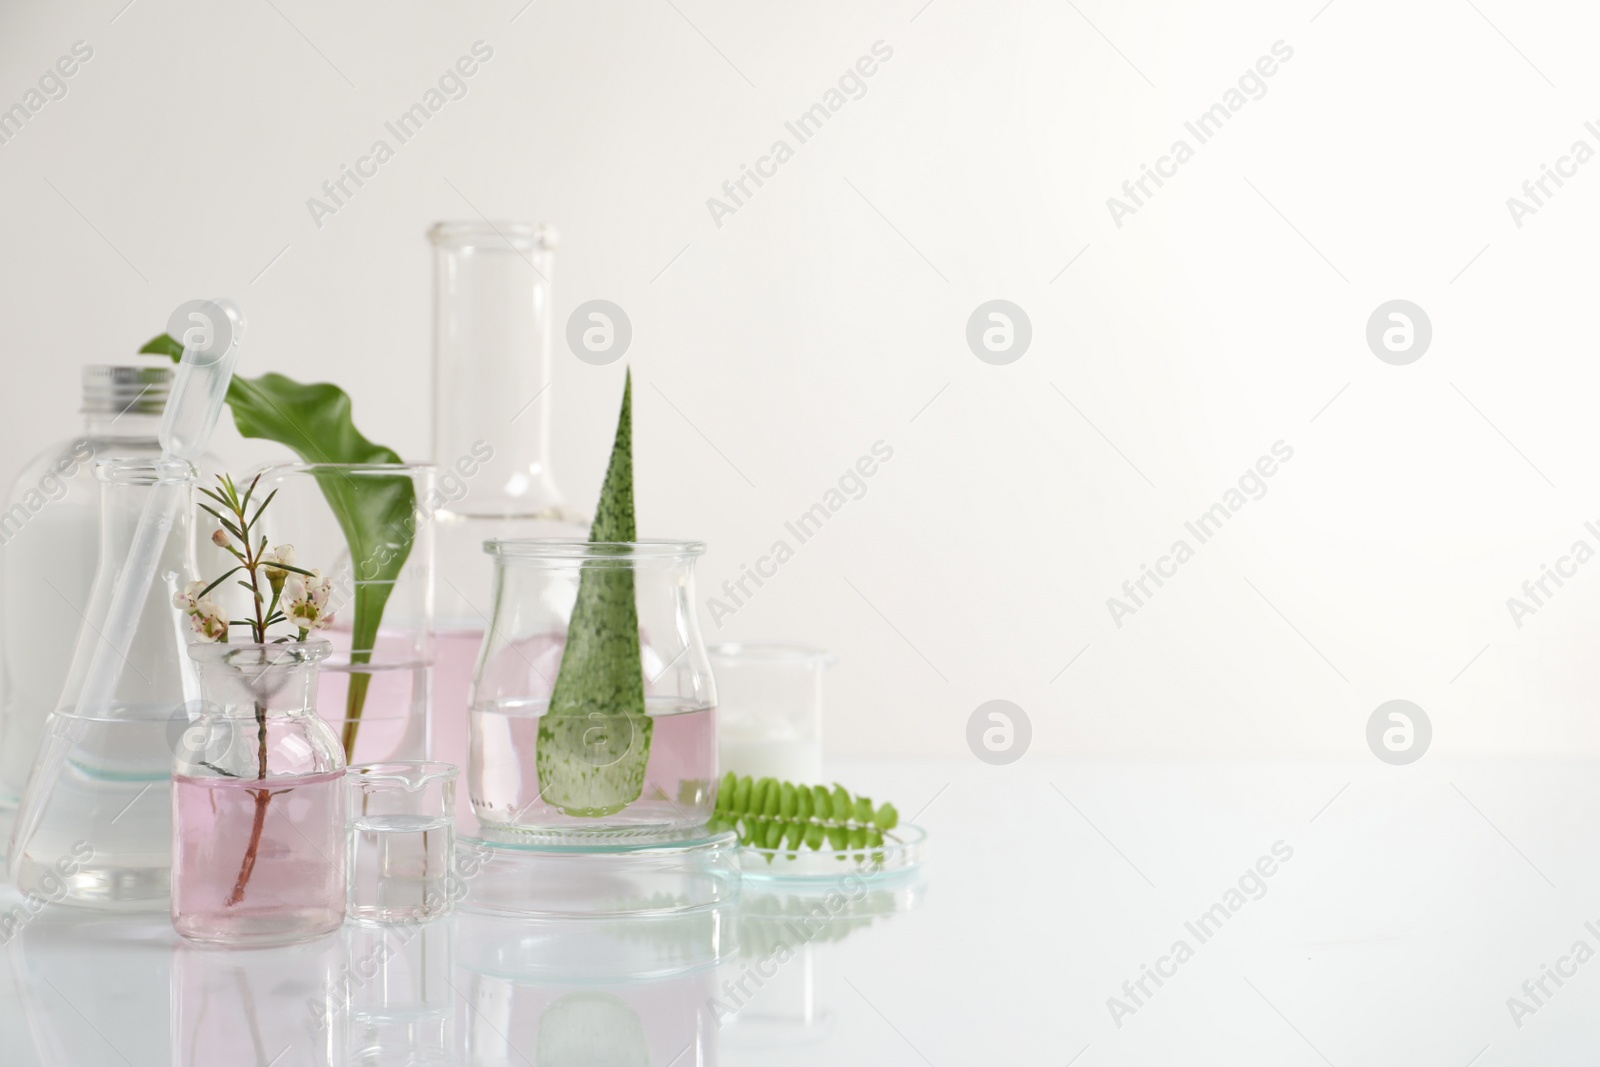 Photo of Organic cosmetic product, natural ingredients and laboratory glassware on white table, space for text